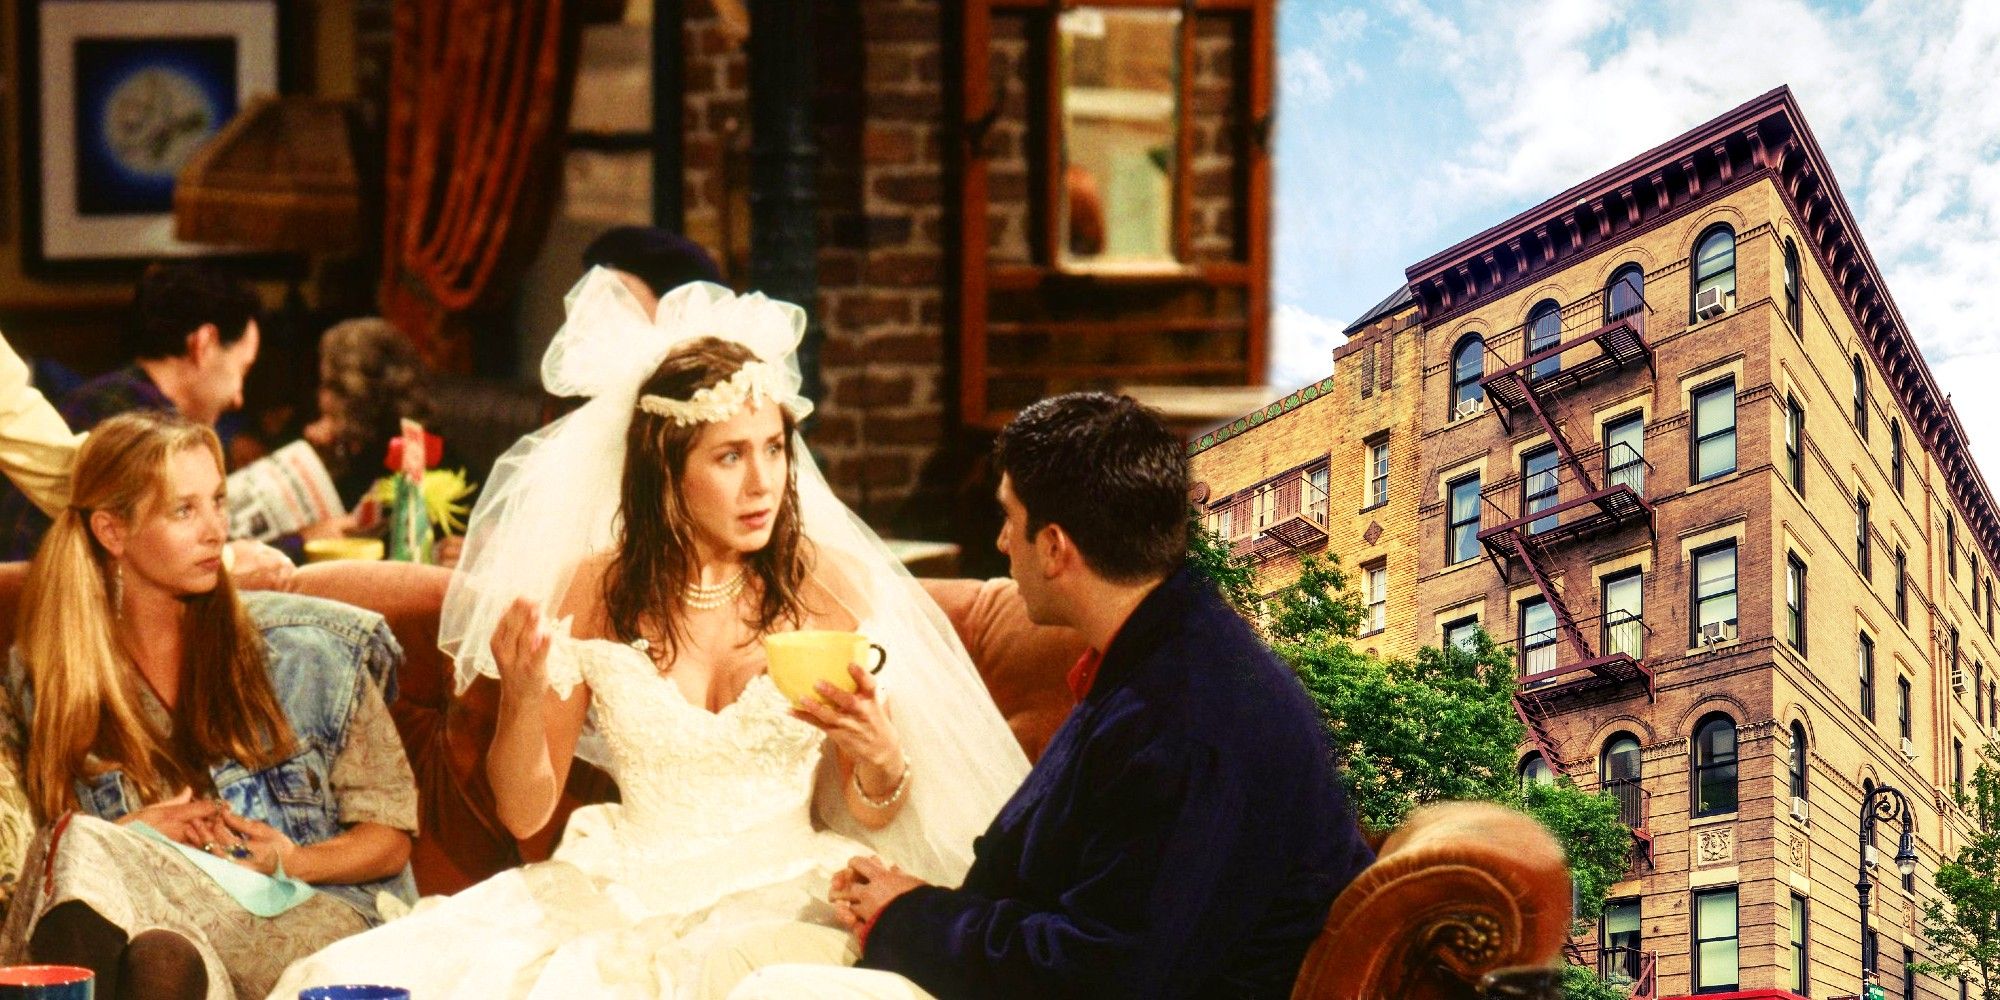 12 Friends filming locations in New York and beyond